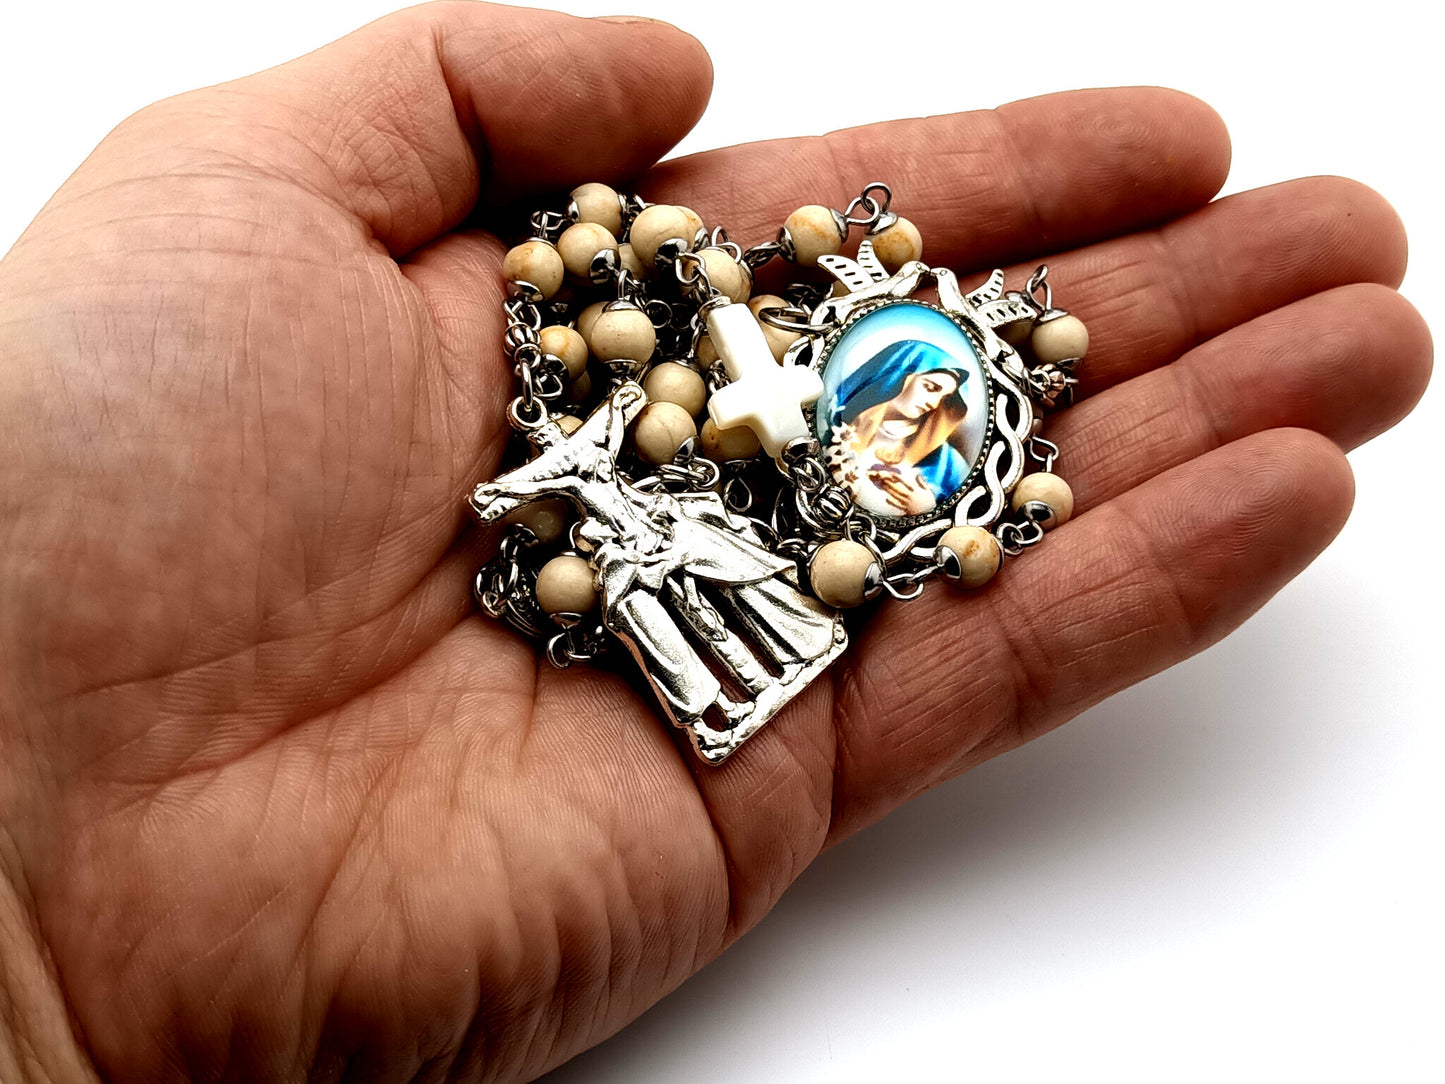 Our Lady of Sorrows unique rosary beads dolor gemstone prayer chaplet with mother of pearl cross and Saint John  and Mary crucifix with Holy Spirit medal.